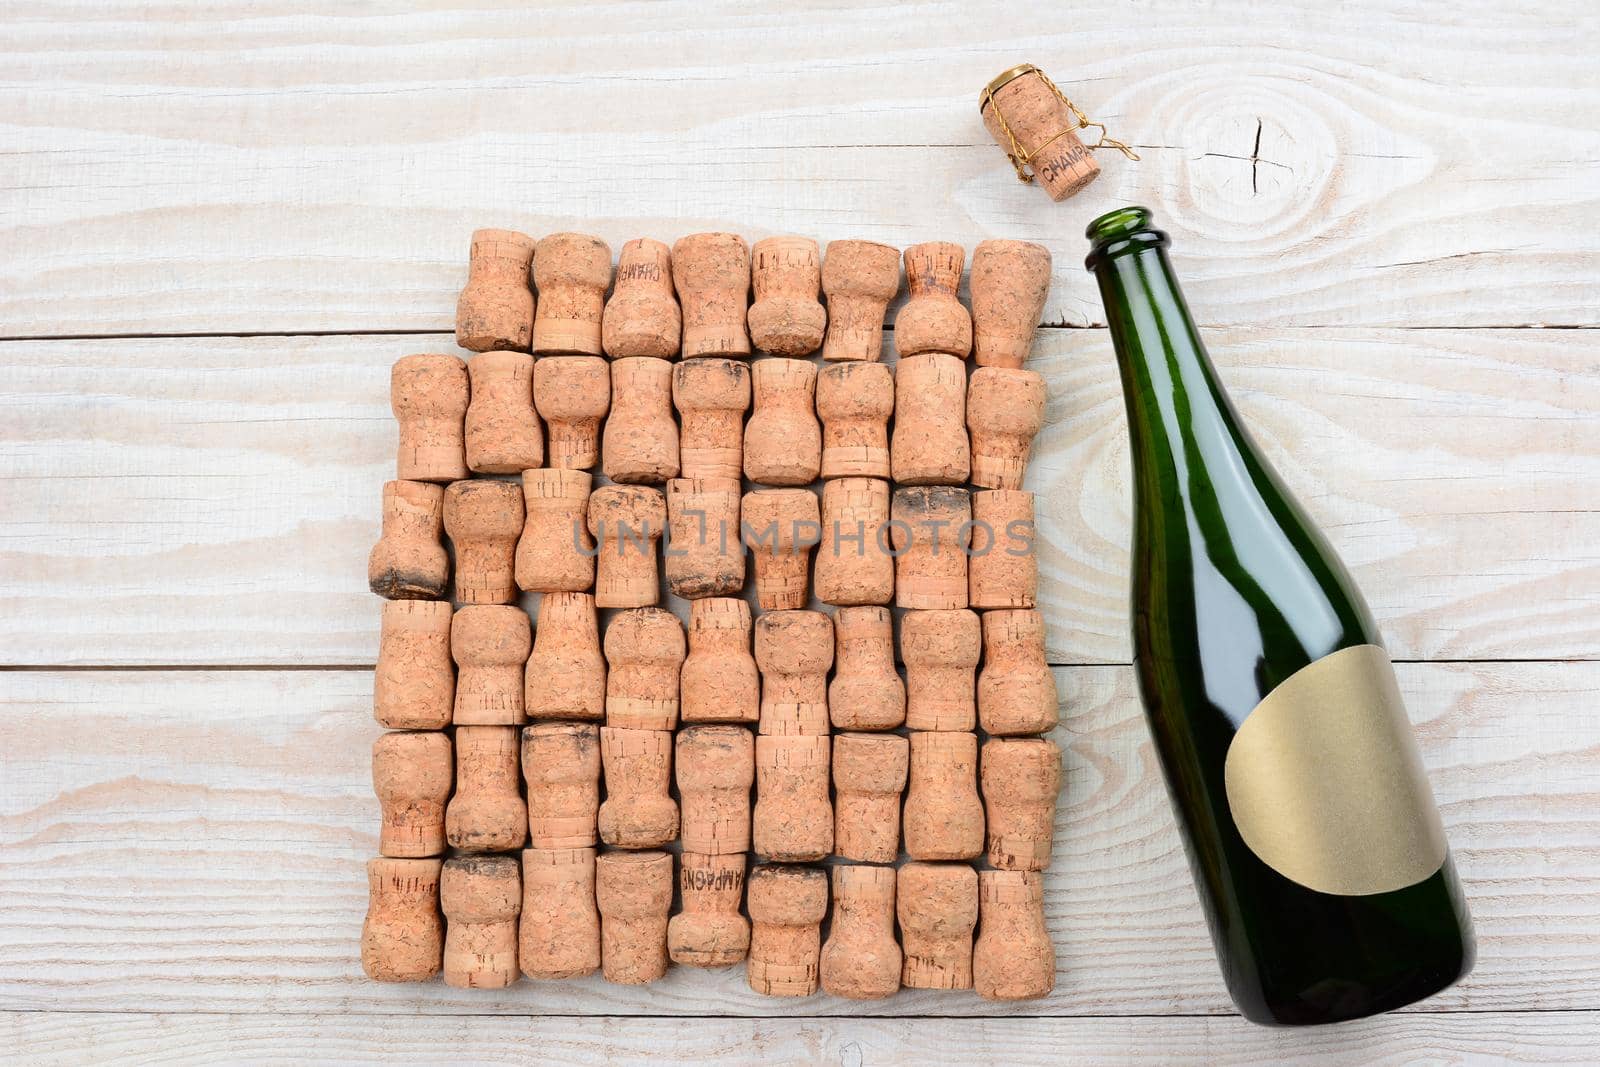 Champagne Blank Label and Corks by sCukrov